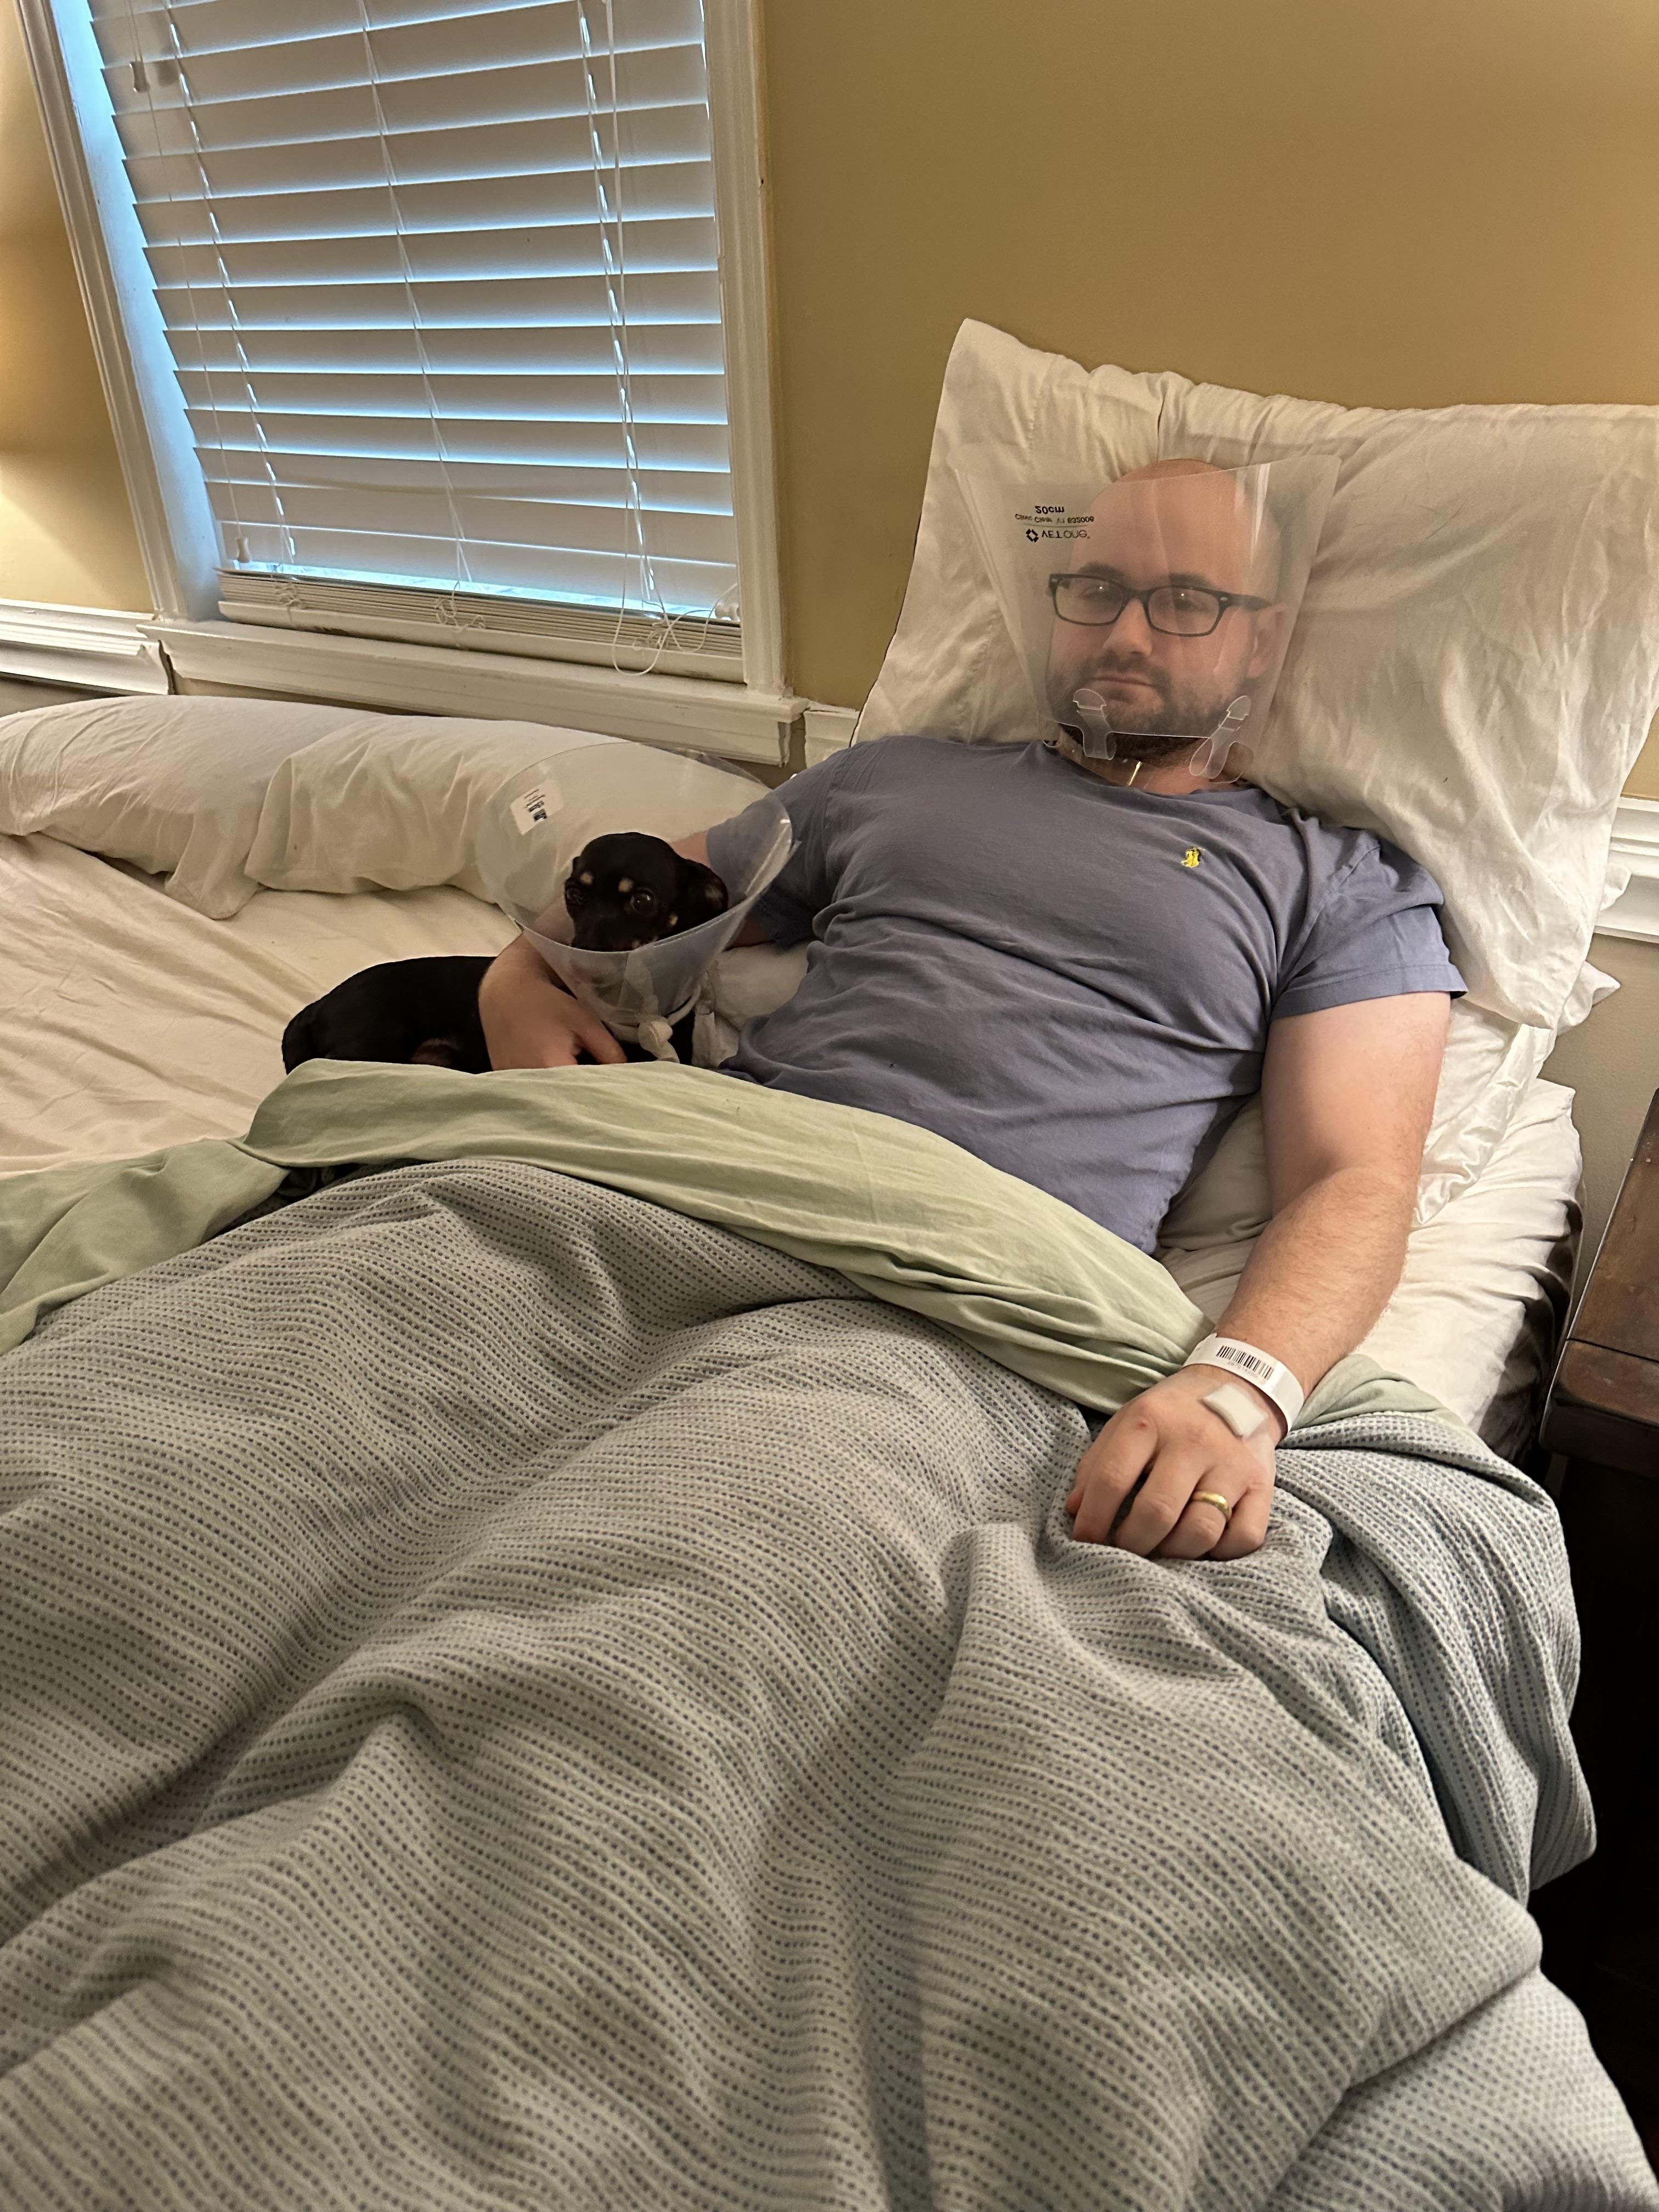 Not even a day after our dog had a mass removal, I ended up having an emergency appendectomy. Wife is taking care of both of us.